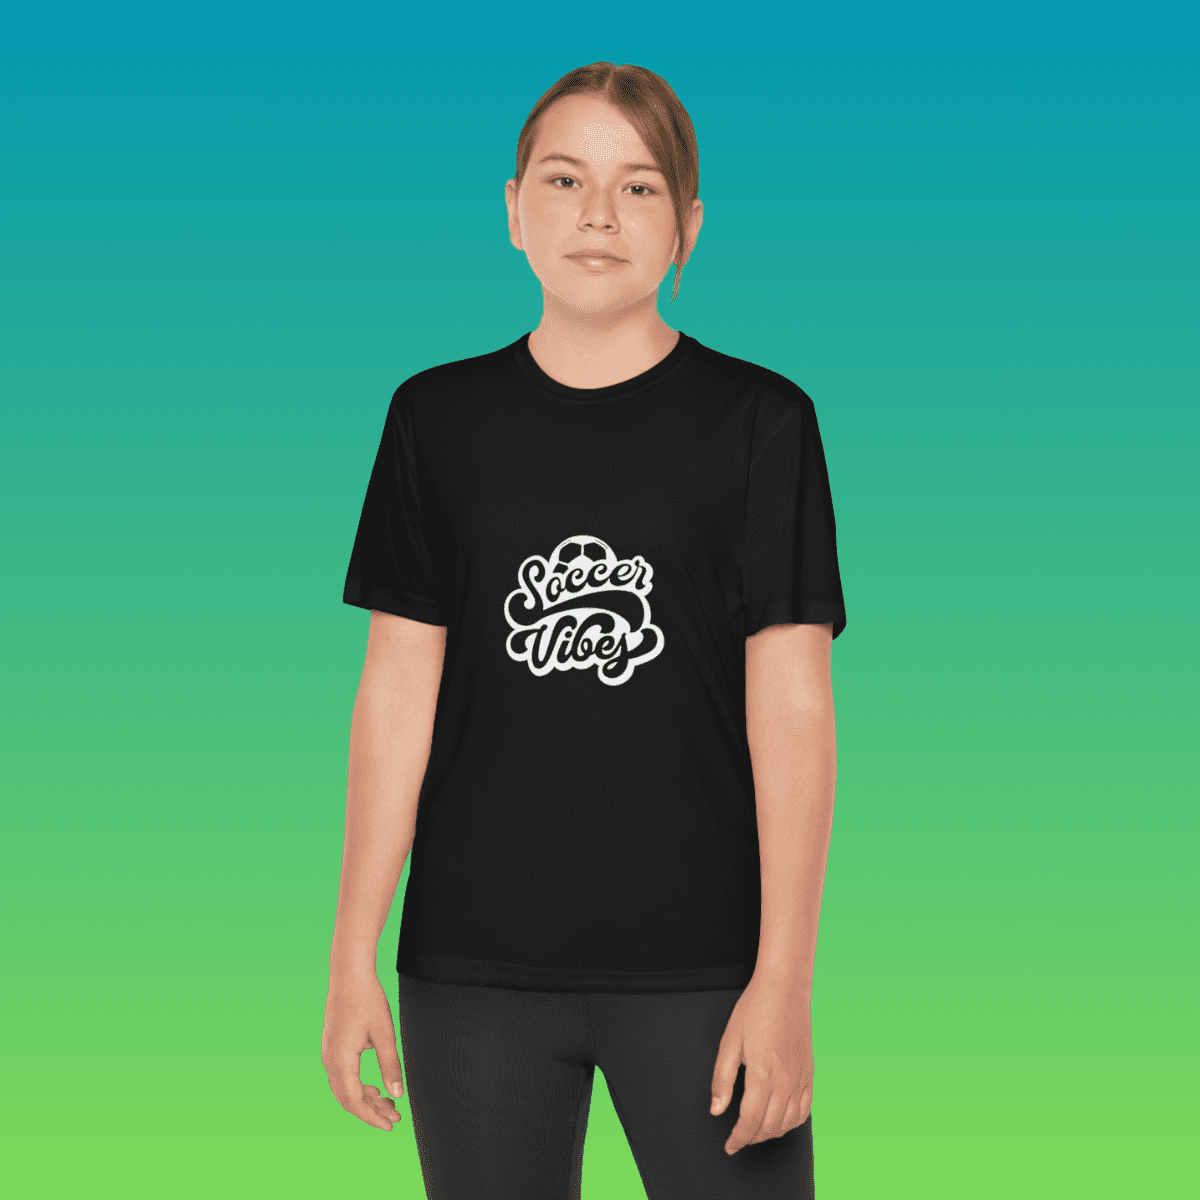 Black Youth Soccer Vibes Moisture-Wicking Tee